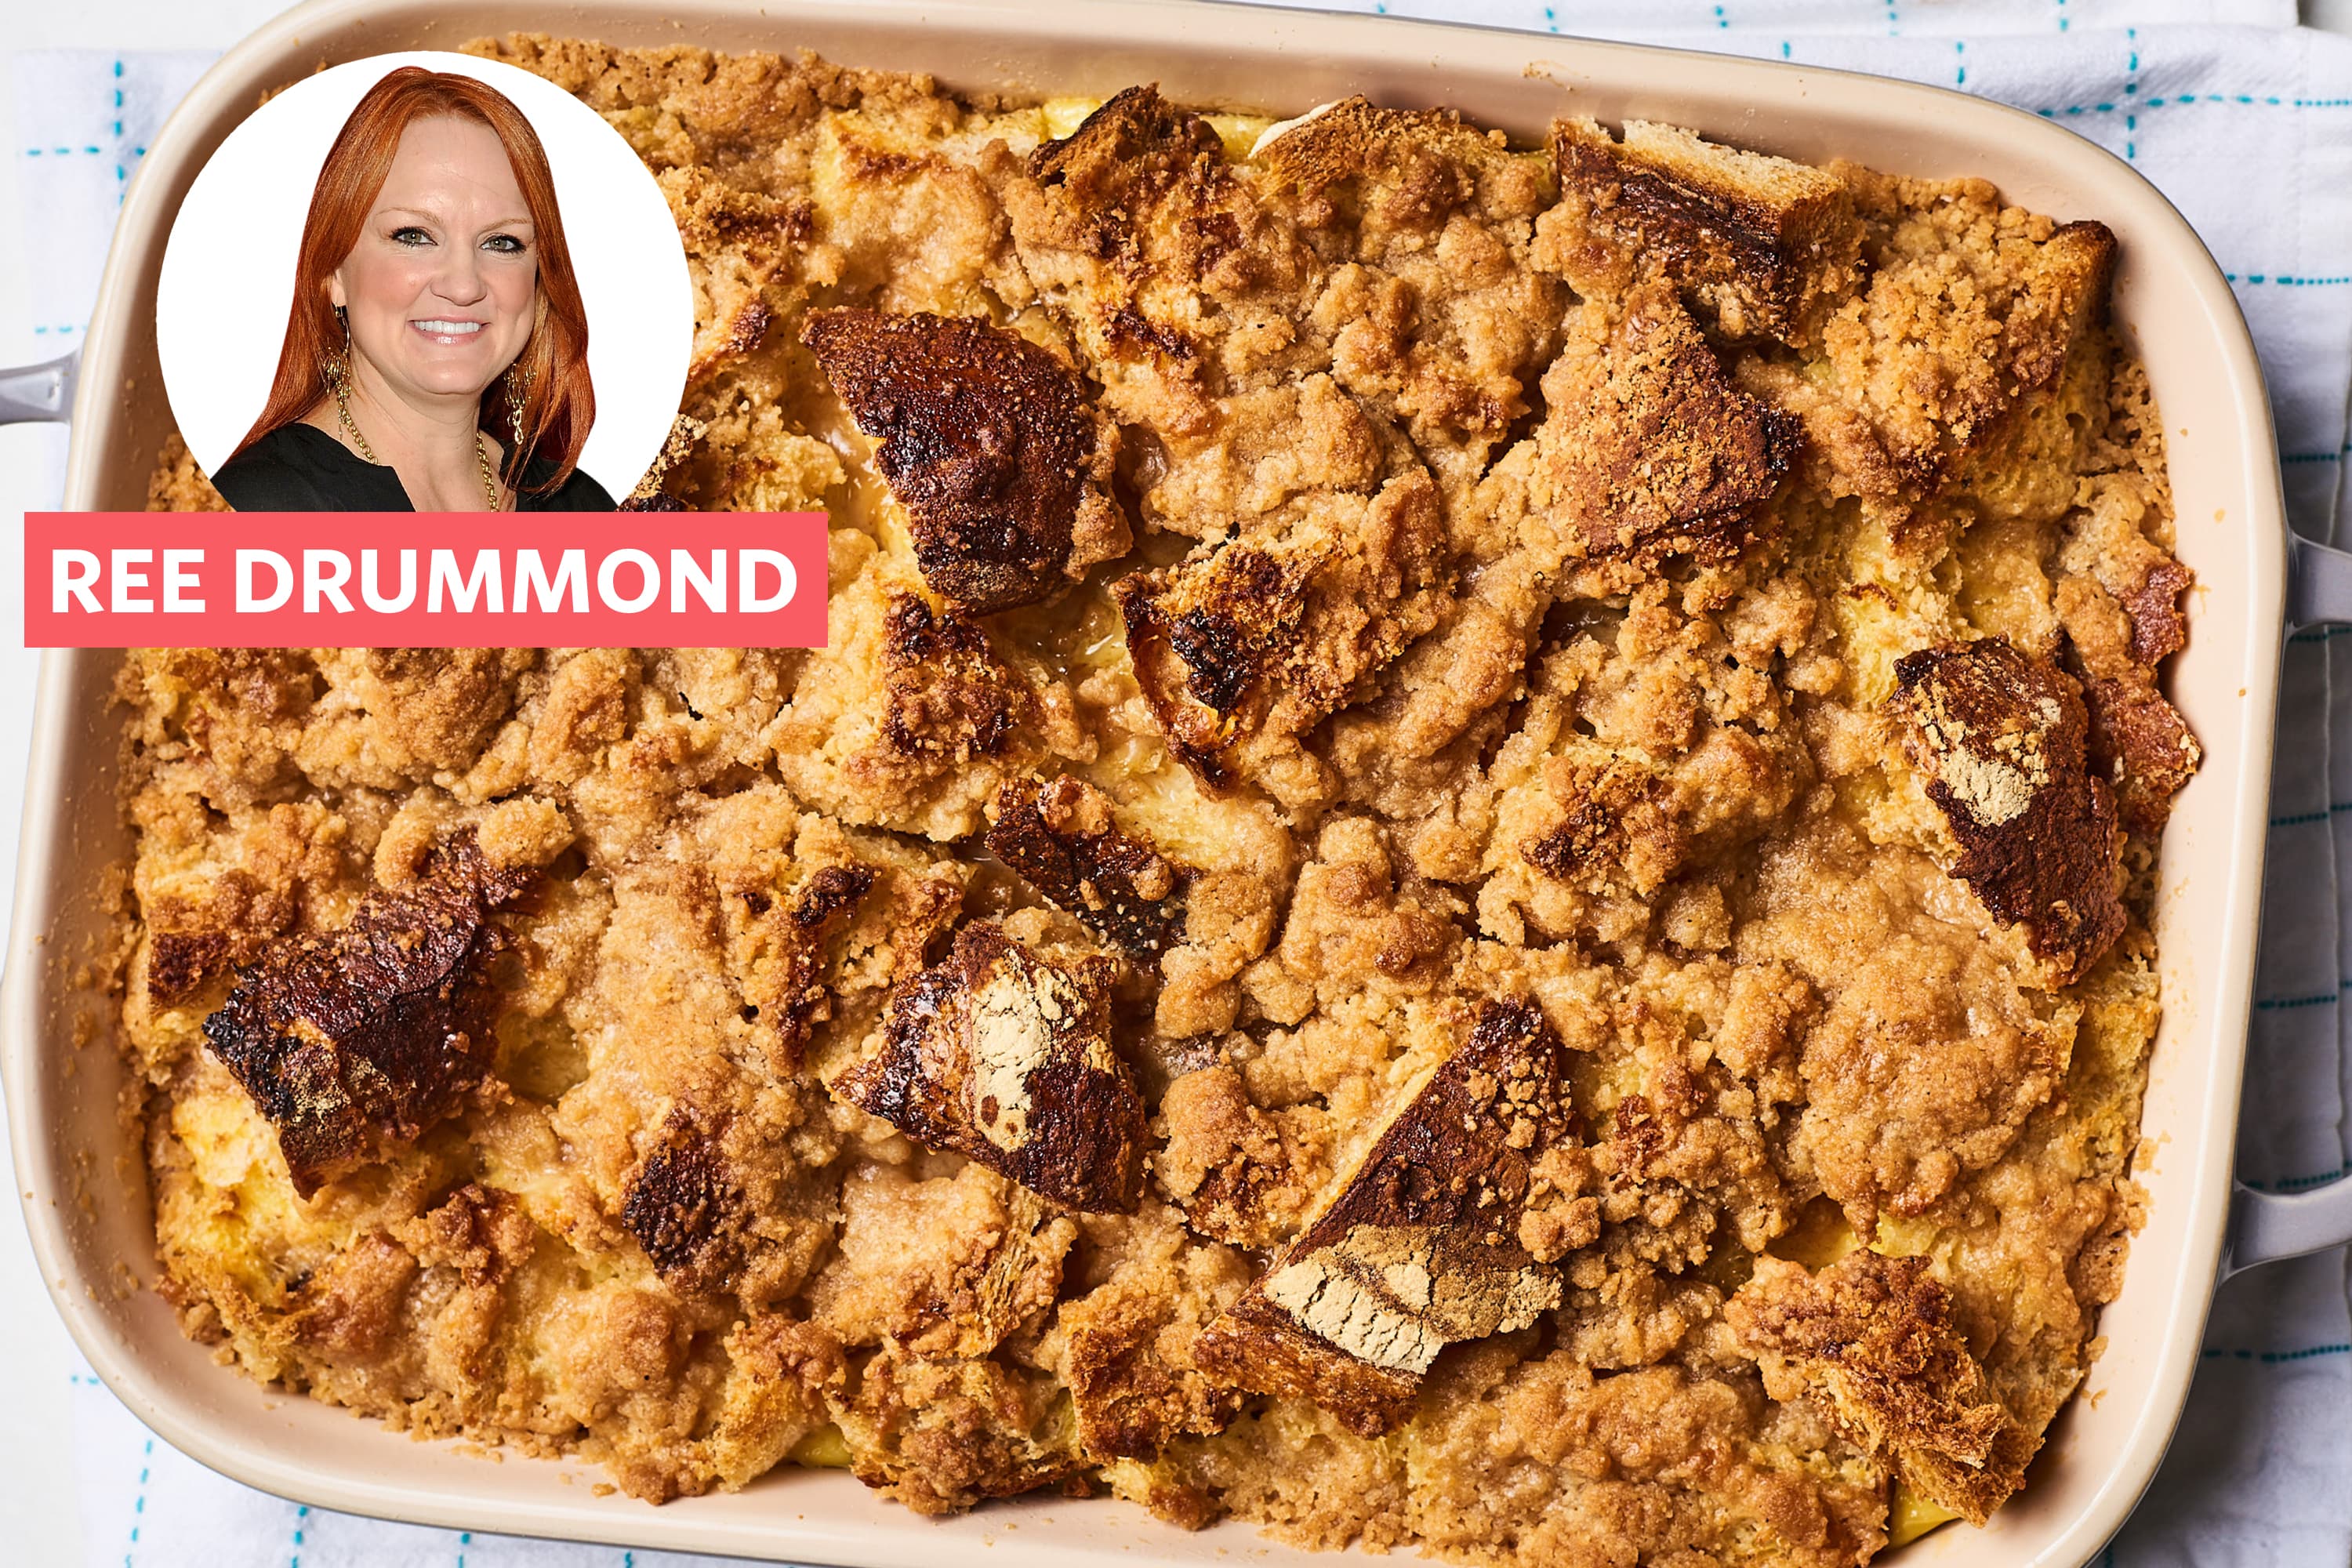 ree drummond baked french toast - www.gklondon.co.uk.